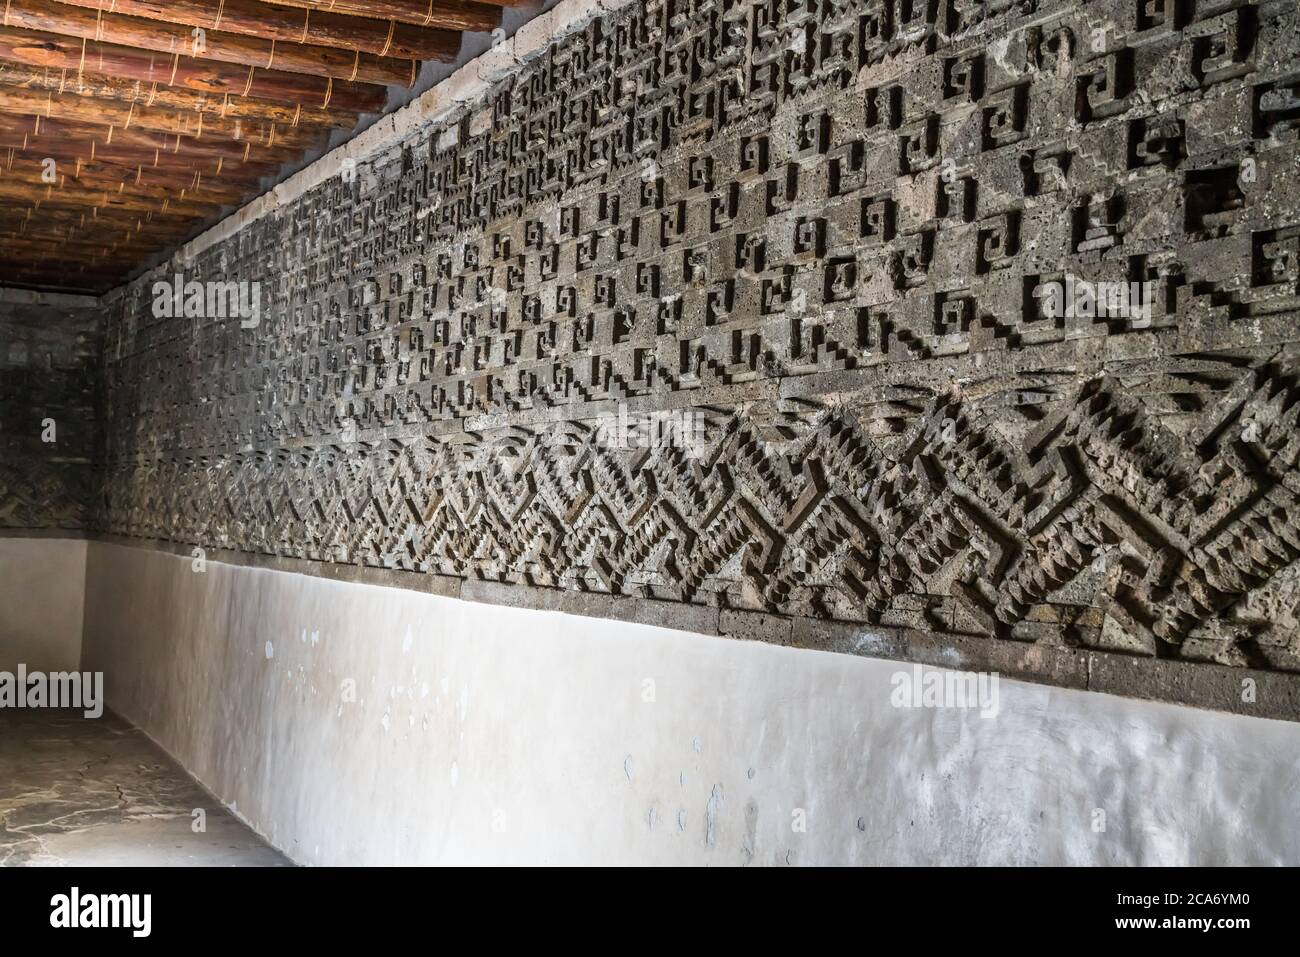 Stone fretwork friezes inside a room in the Palace, Building 7,  in the ruins of the Zapotec city of Mitla in Oaxaca, Mexico.  A UNESCO World Heritage Stock Photo